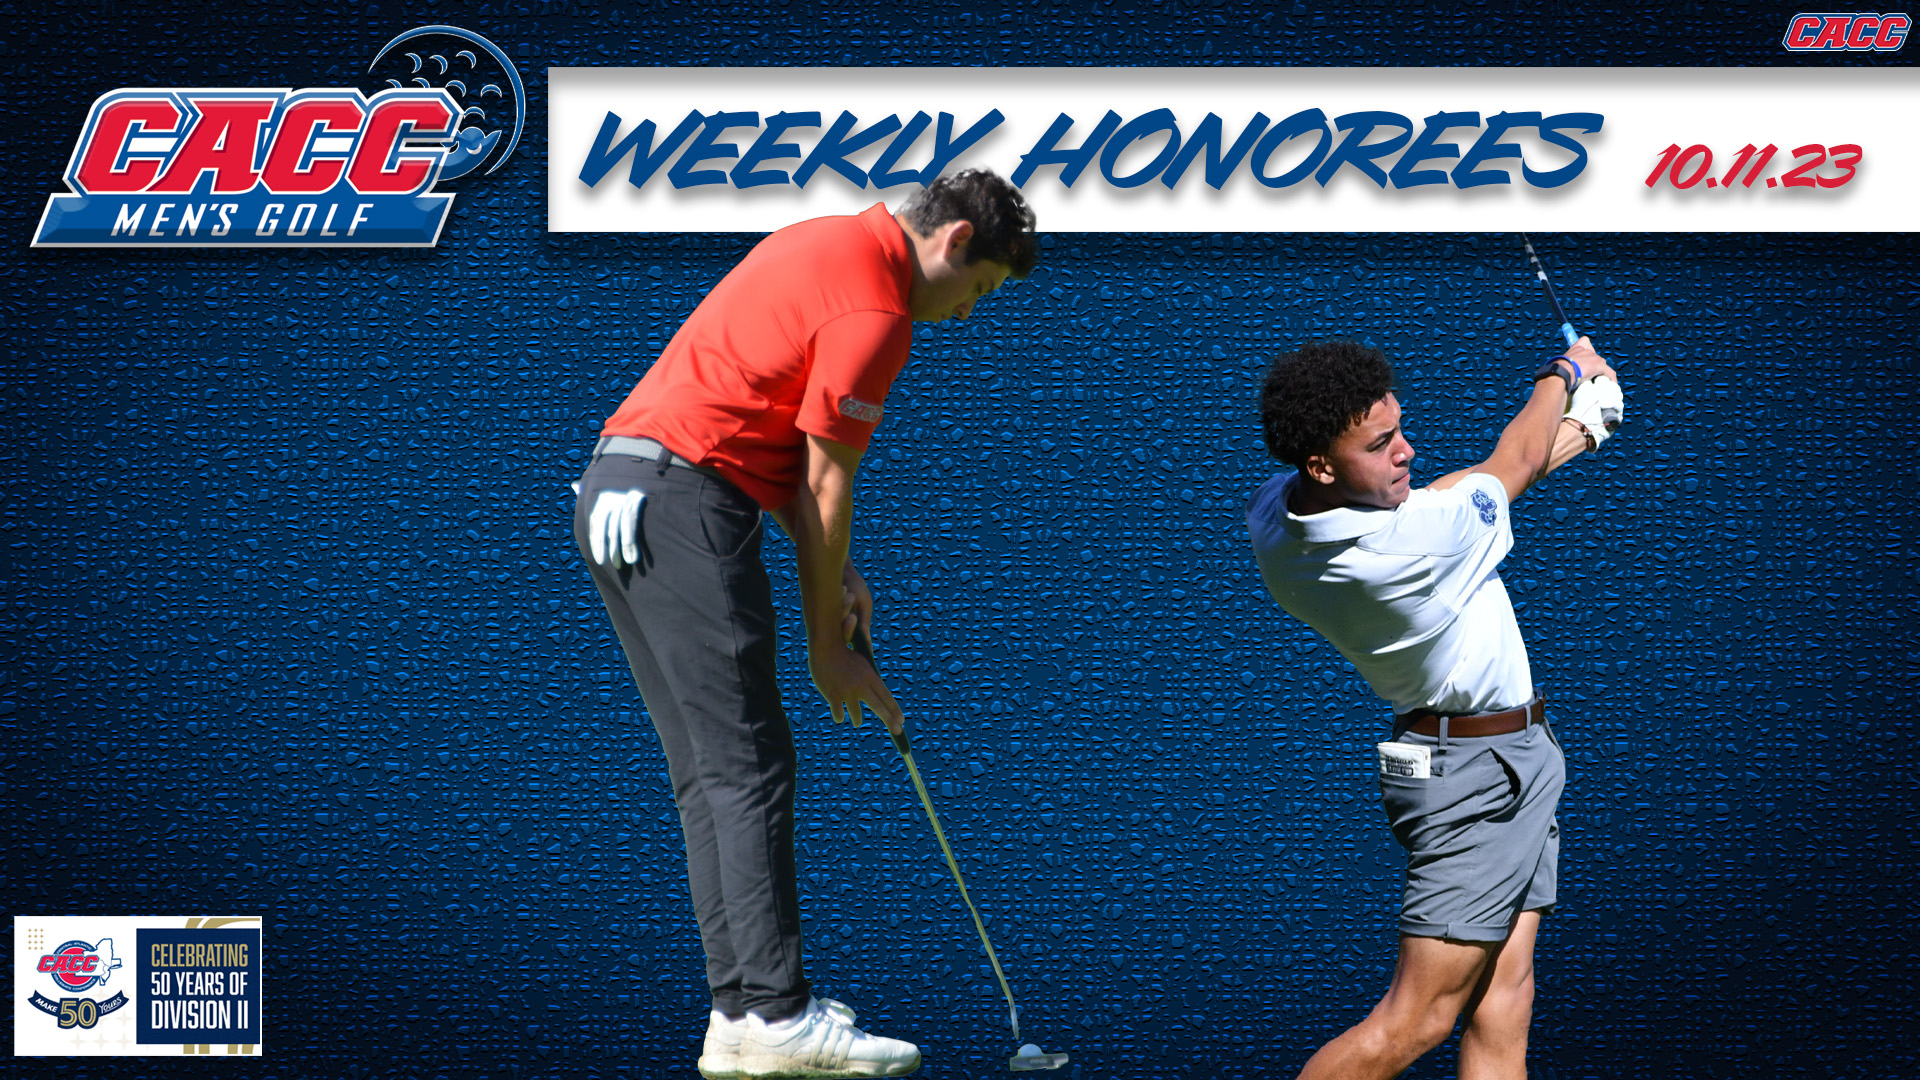 CACC Men's Golf Weekly Honorees (10-11-23)